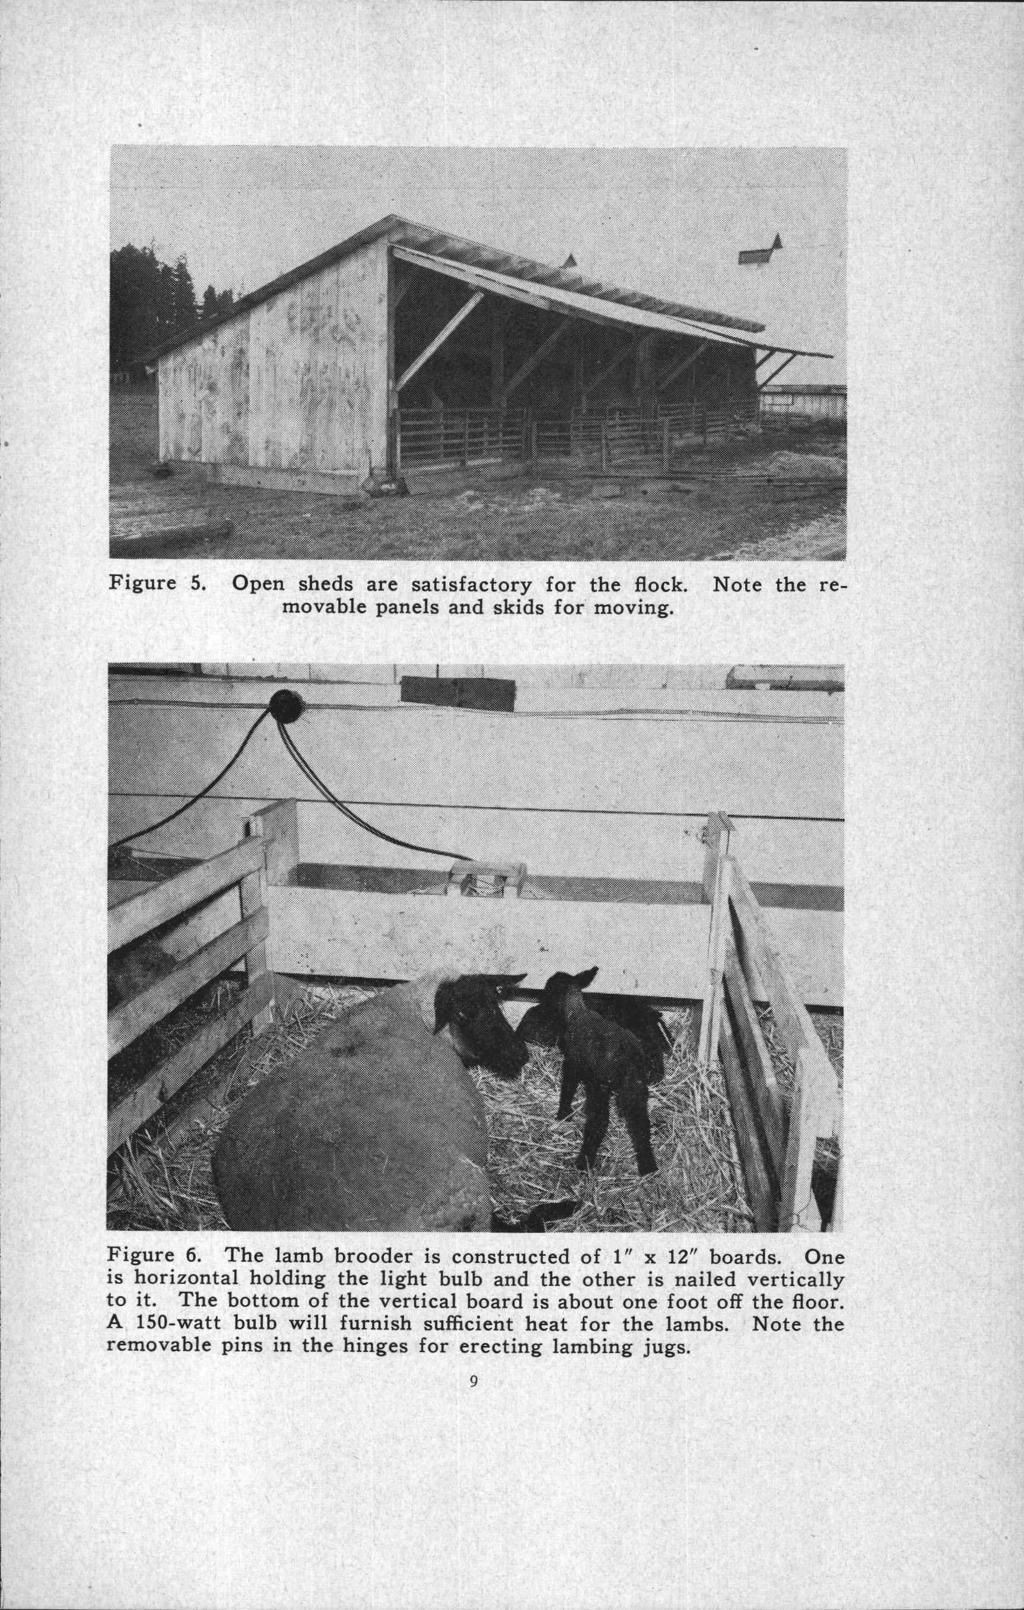 Figure 5. Open sheds are satisfactory for the flock. Note the removable panels and skids for moving. Figure 6. The lamb brooder is constructed of 1" x 12" boards.